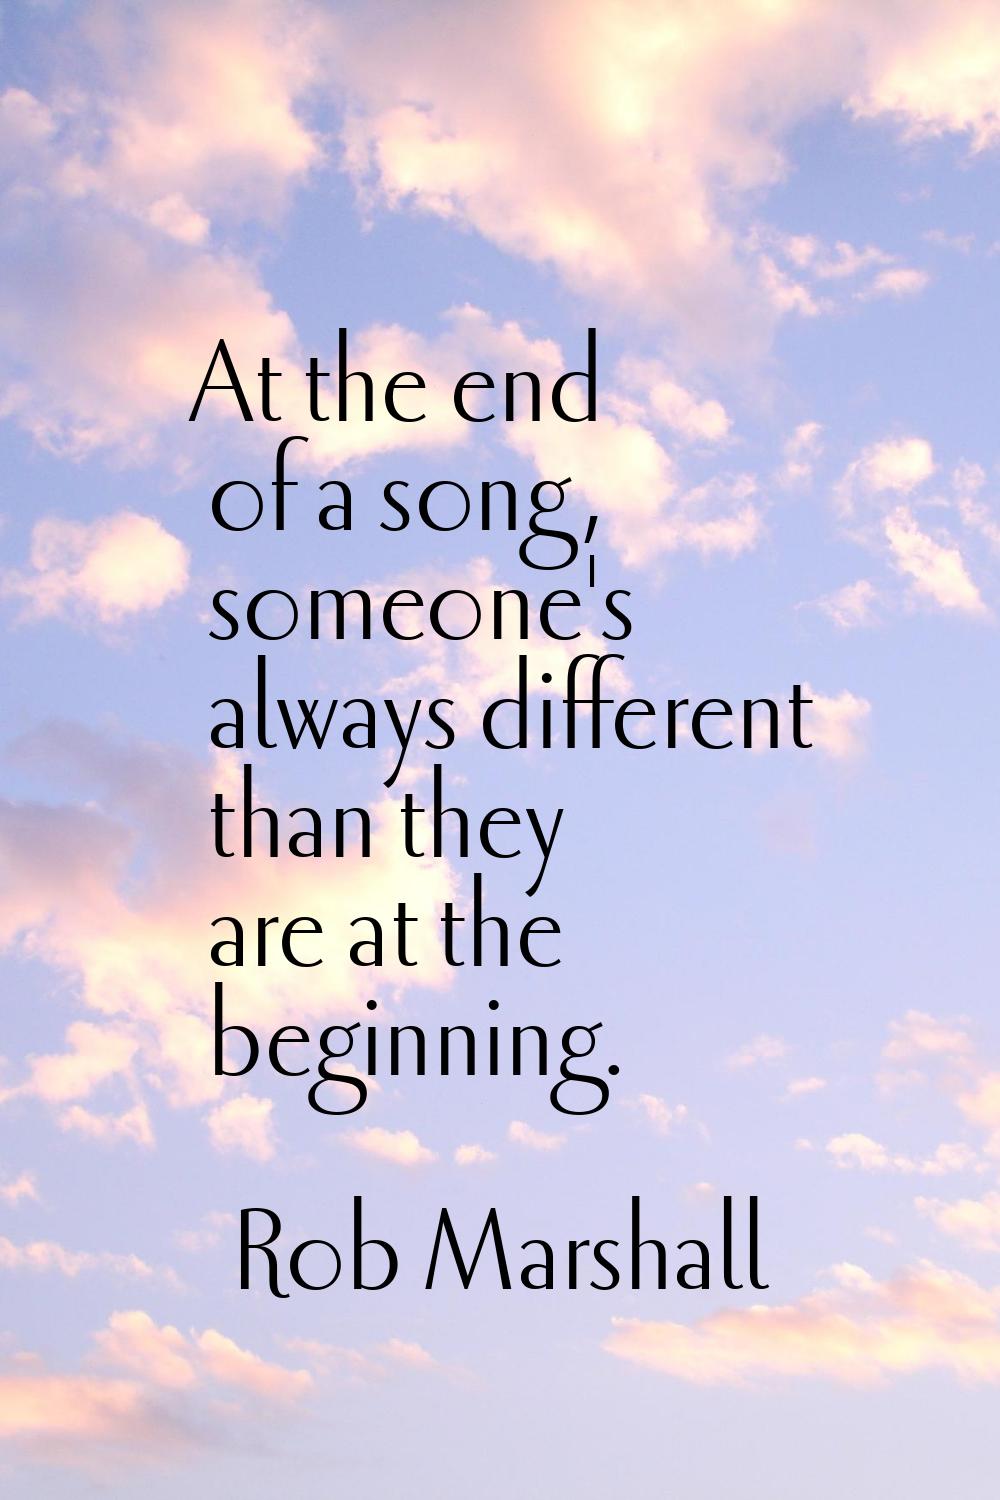 At the end of a song, someone's always different than they are at the beginning.